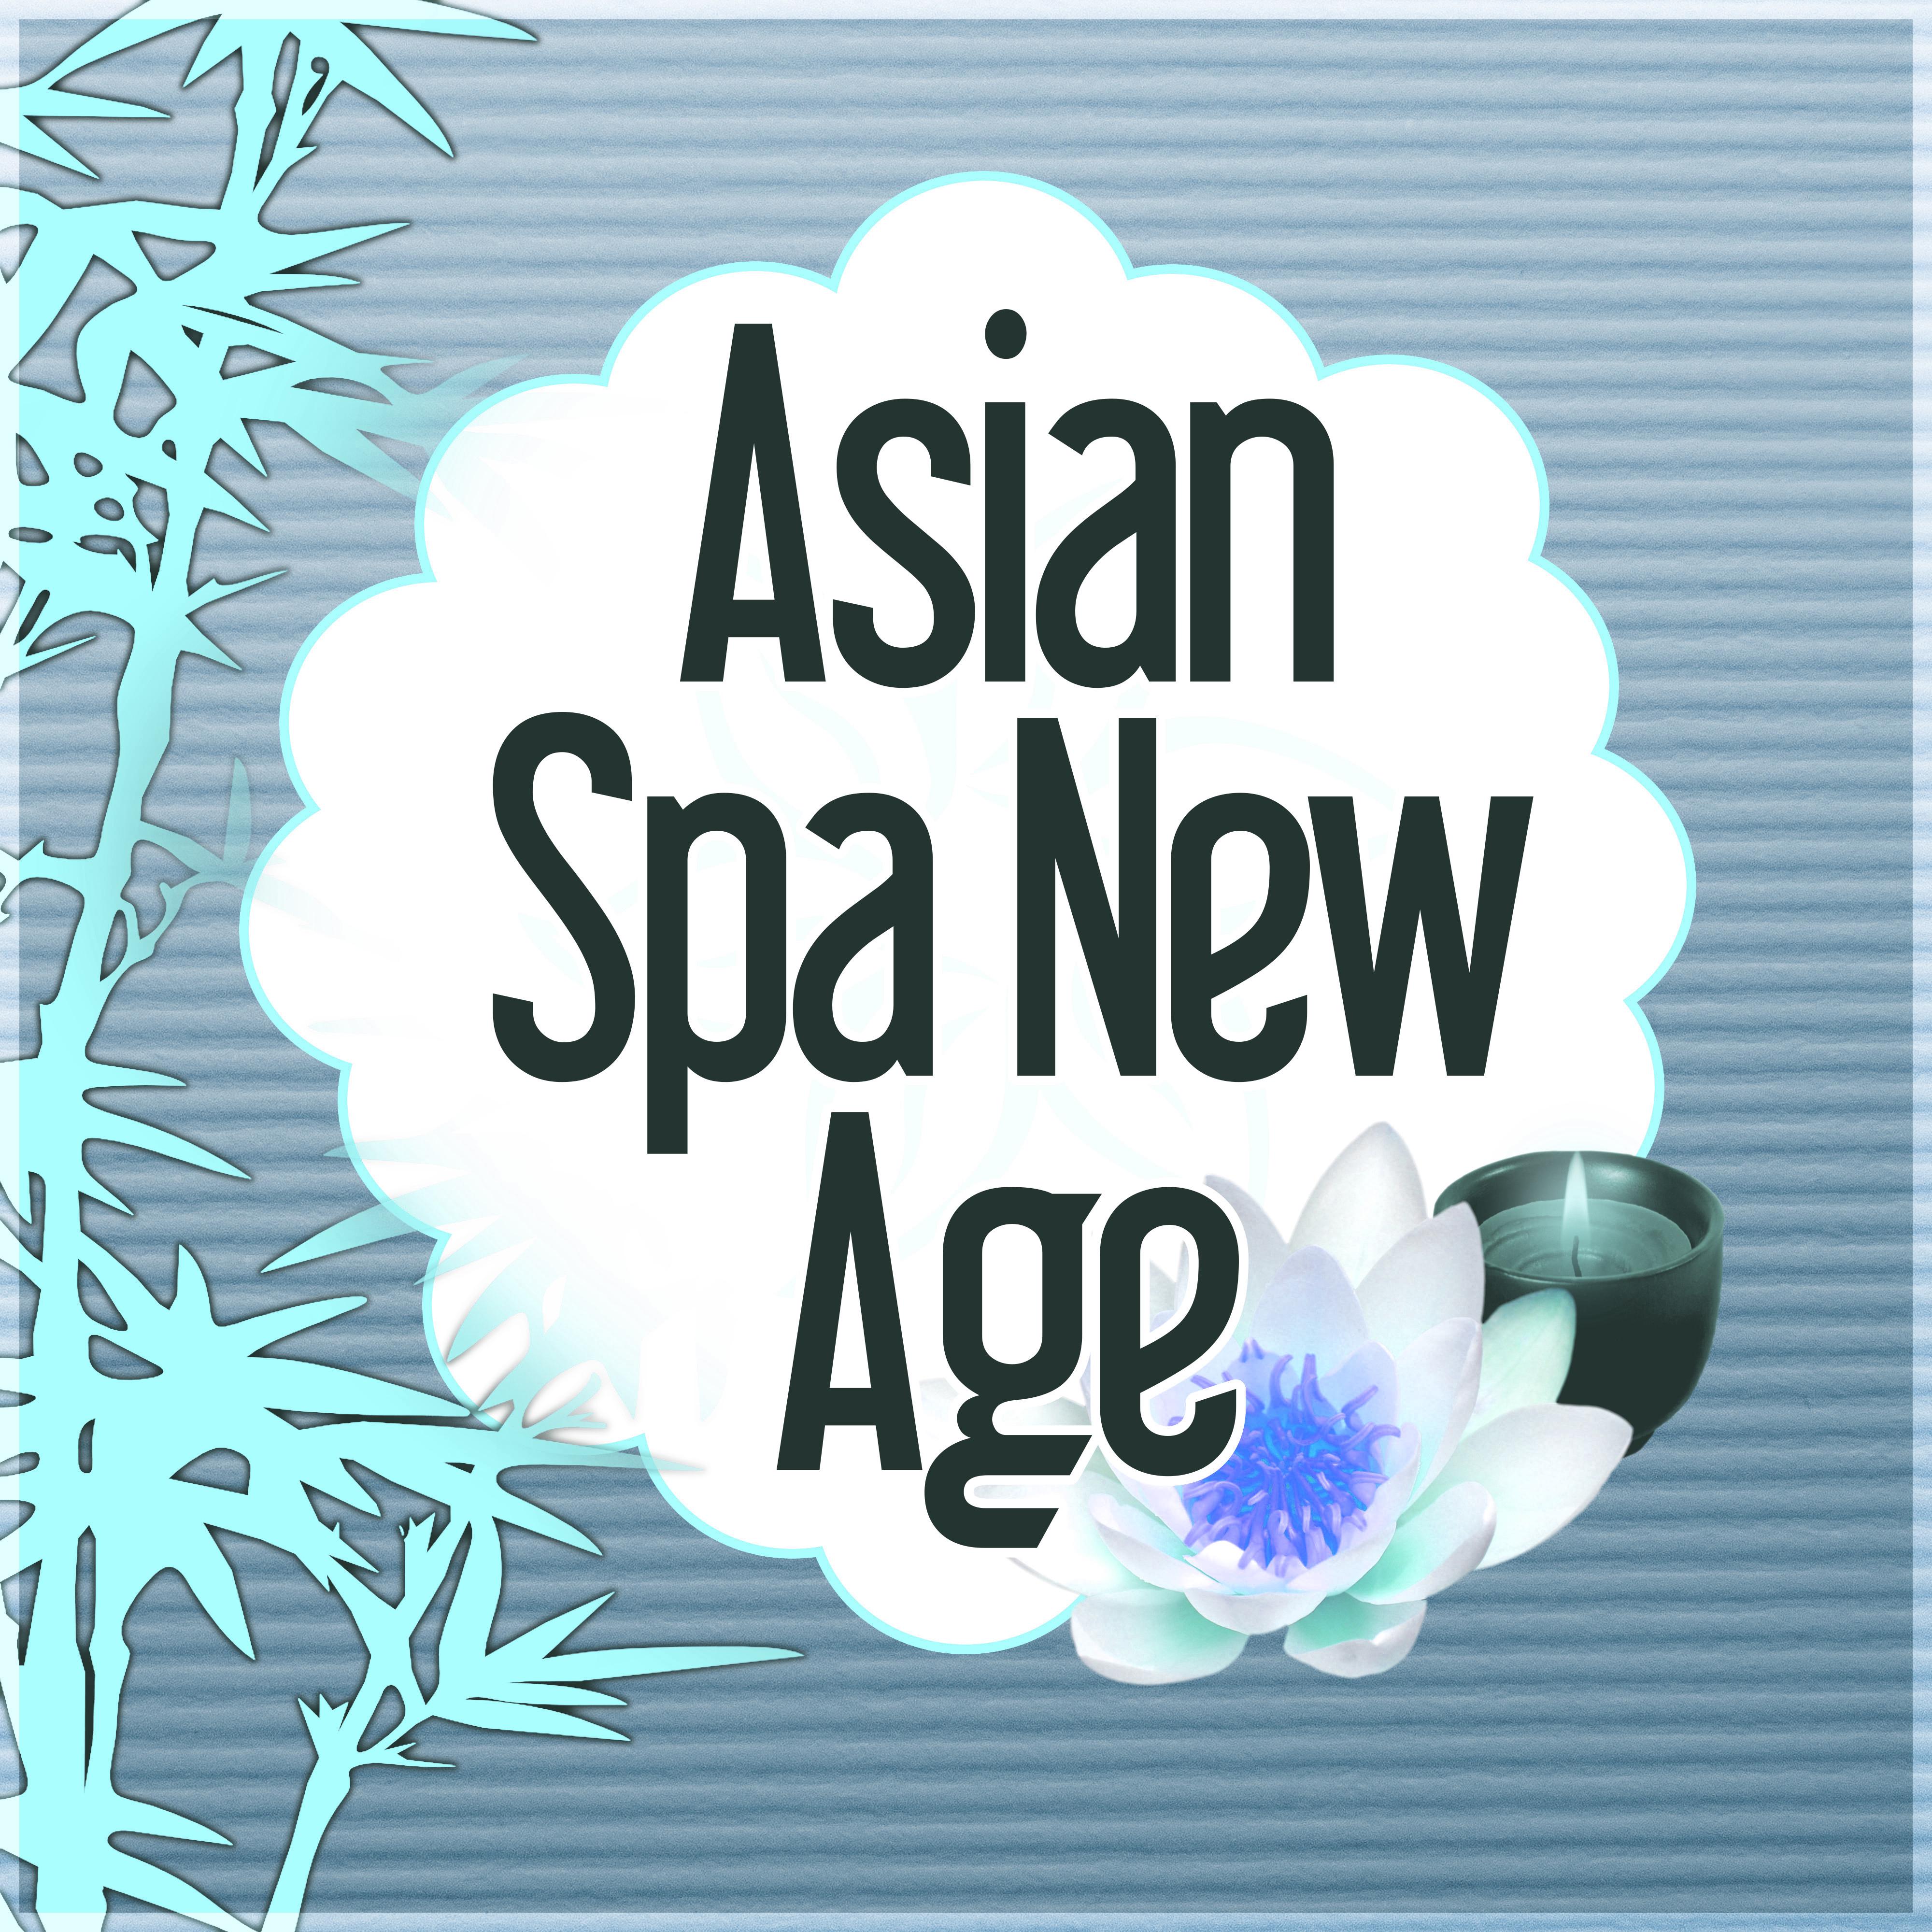 Asian Spa New Age - Asian Music, Flute Music, Nature Sounds, Thai Massage, Serenity Music, Petals, Reflections, Relaxing Music